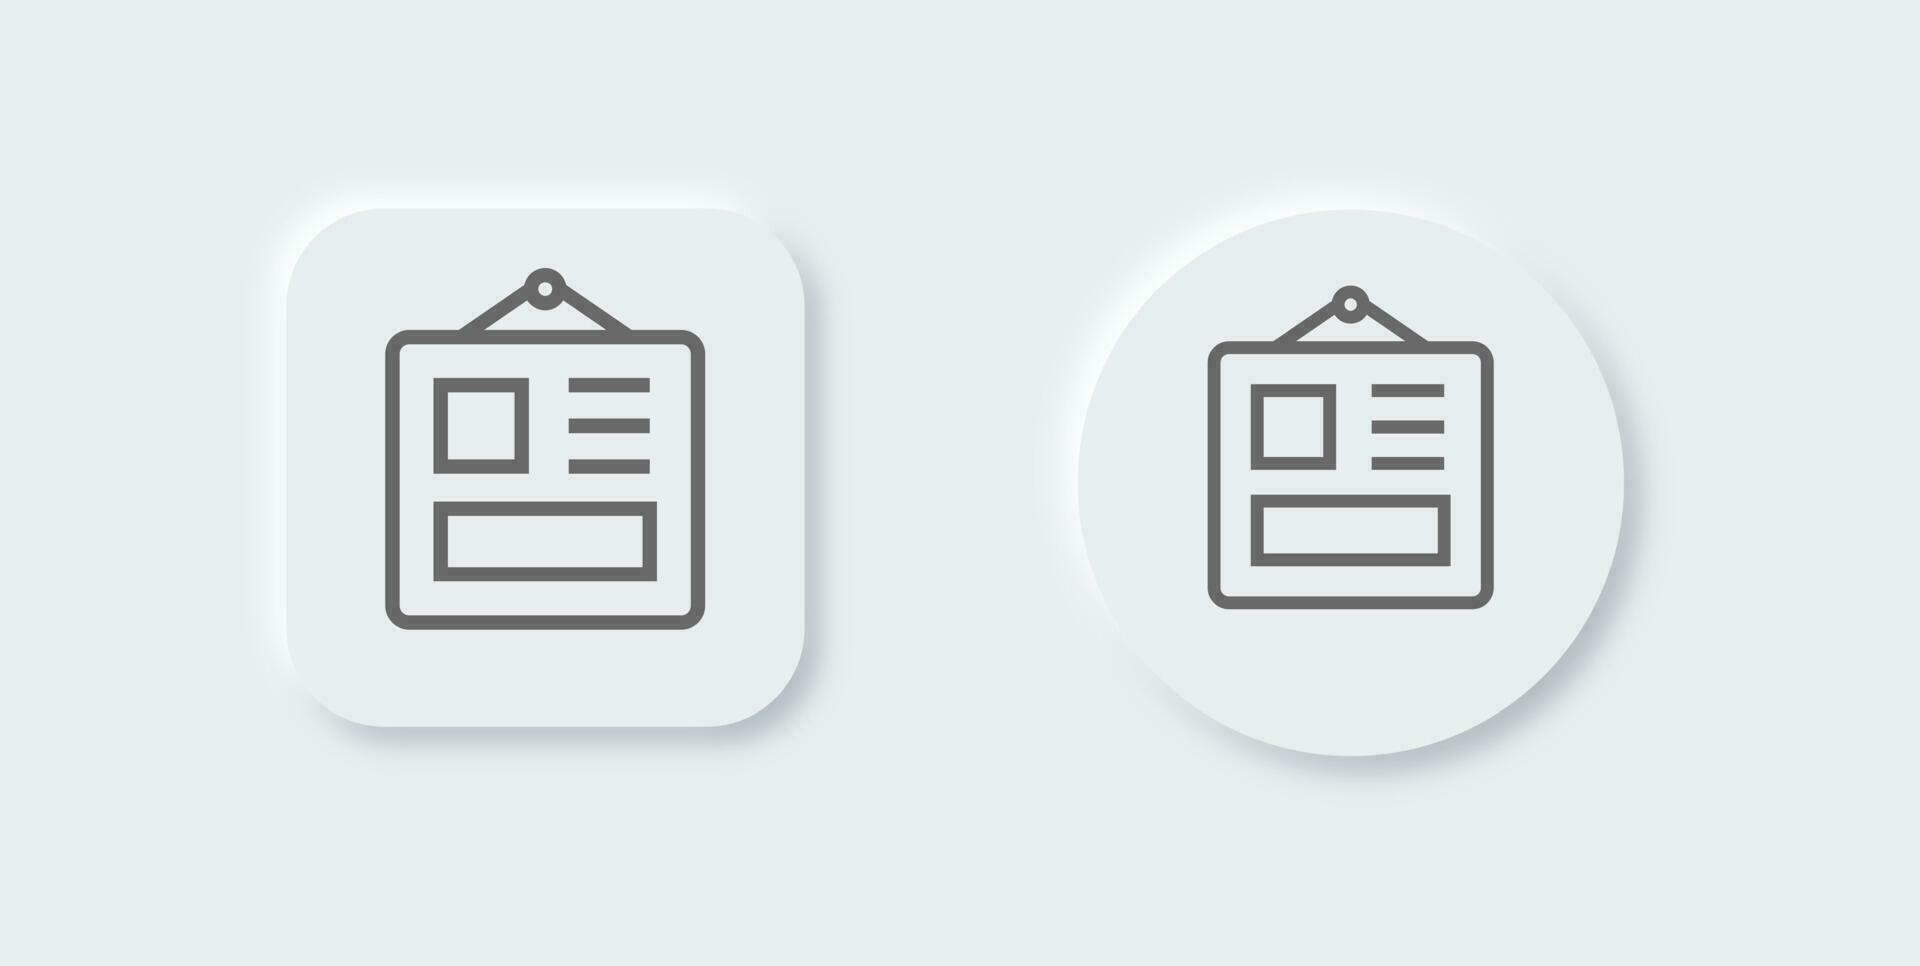 Mood board line icon in neomorphic design style. Template signs vector illustration.